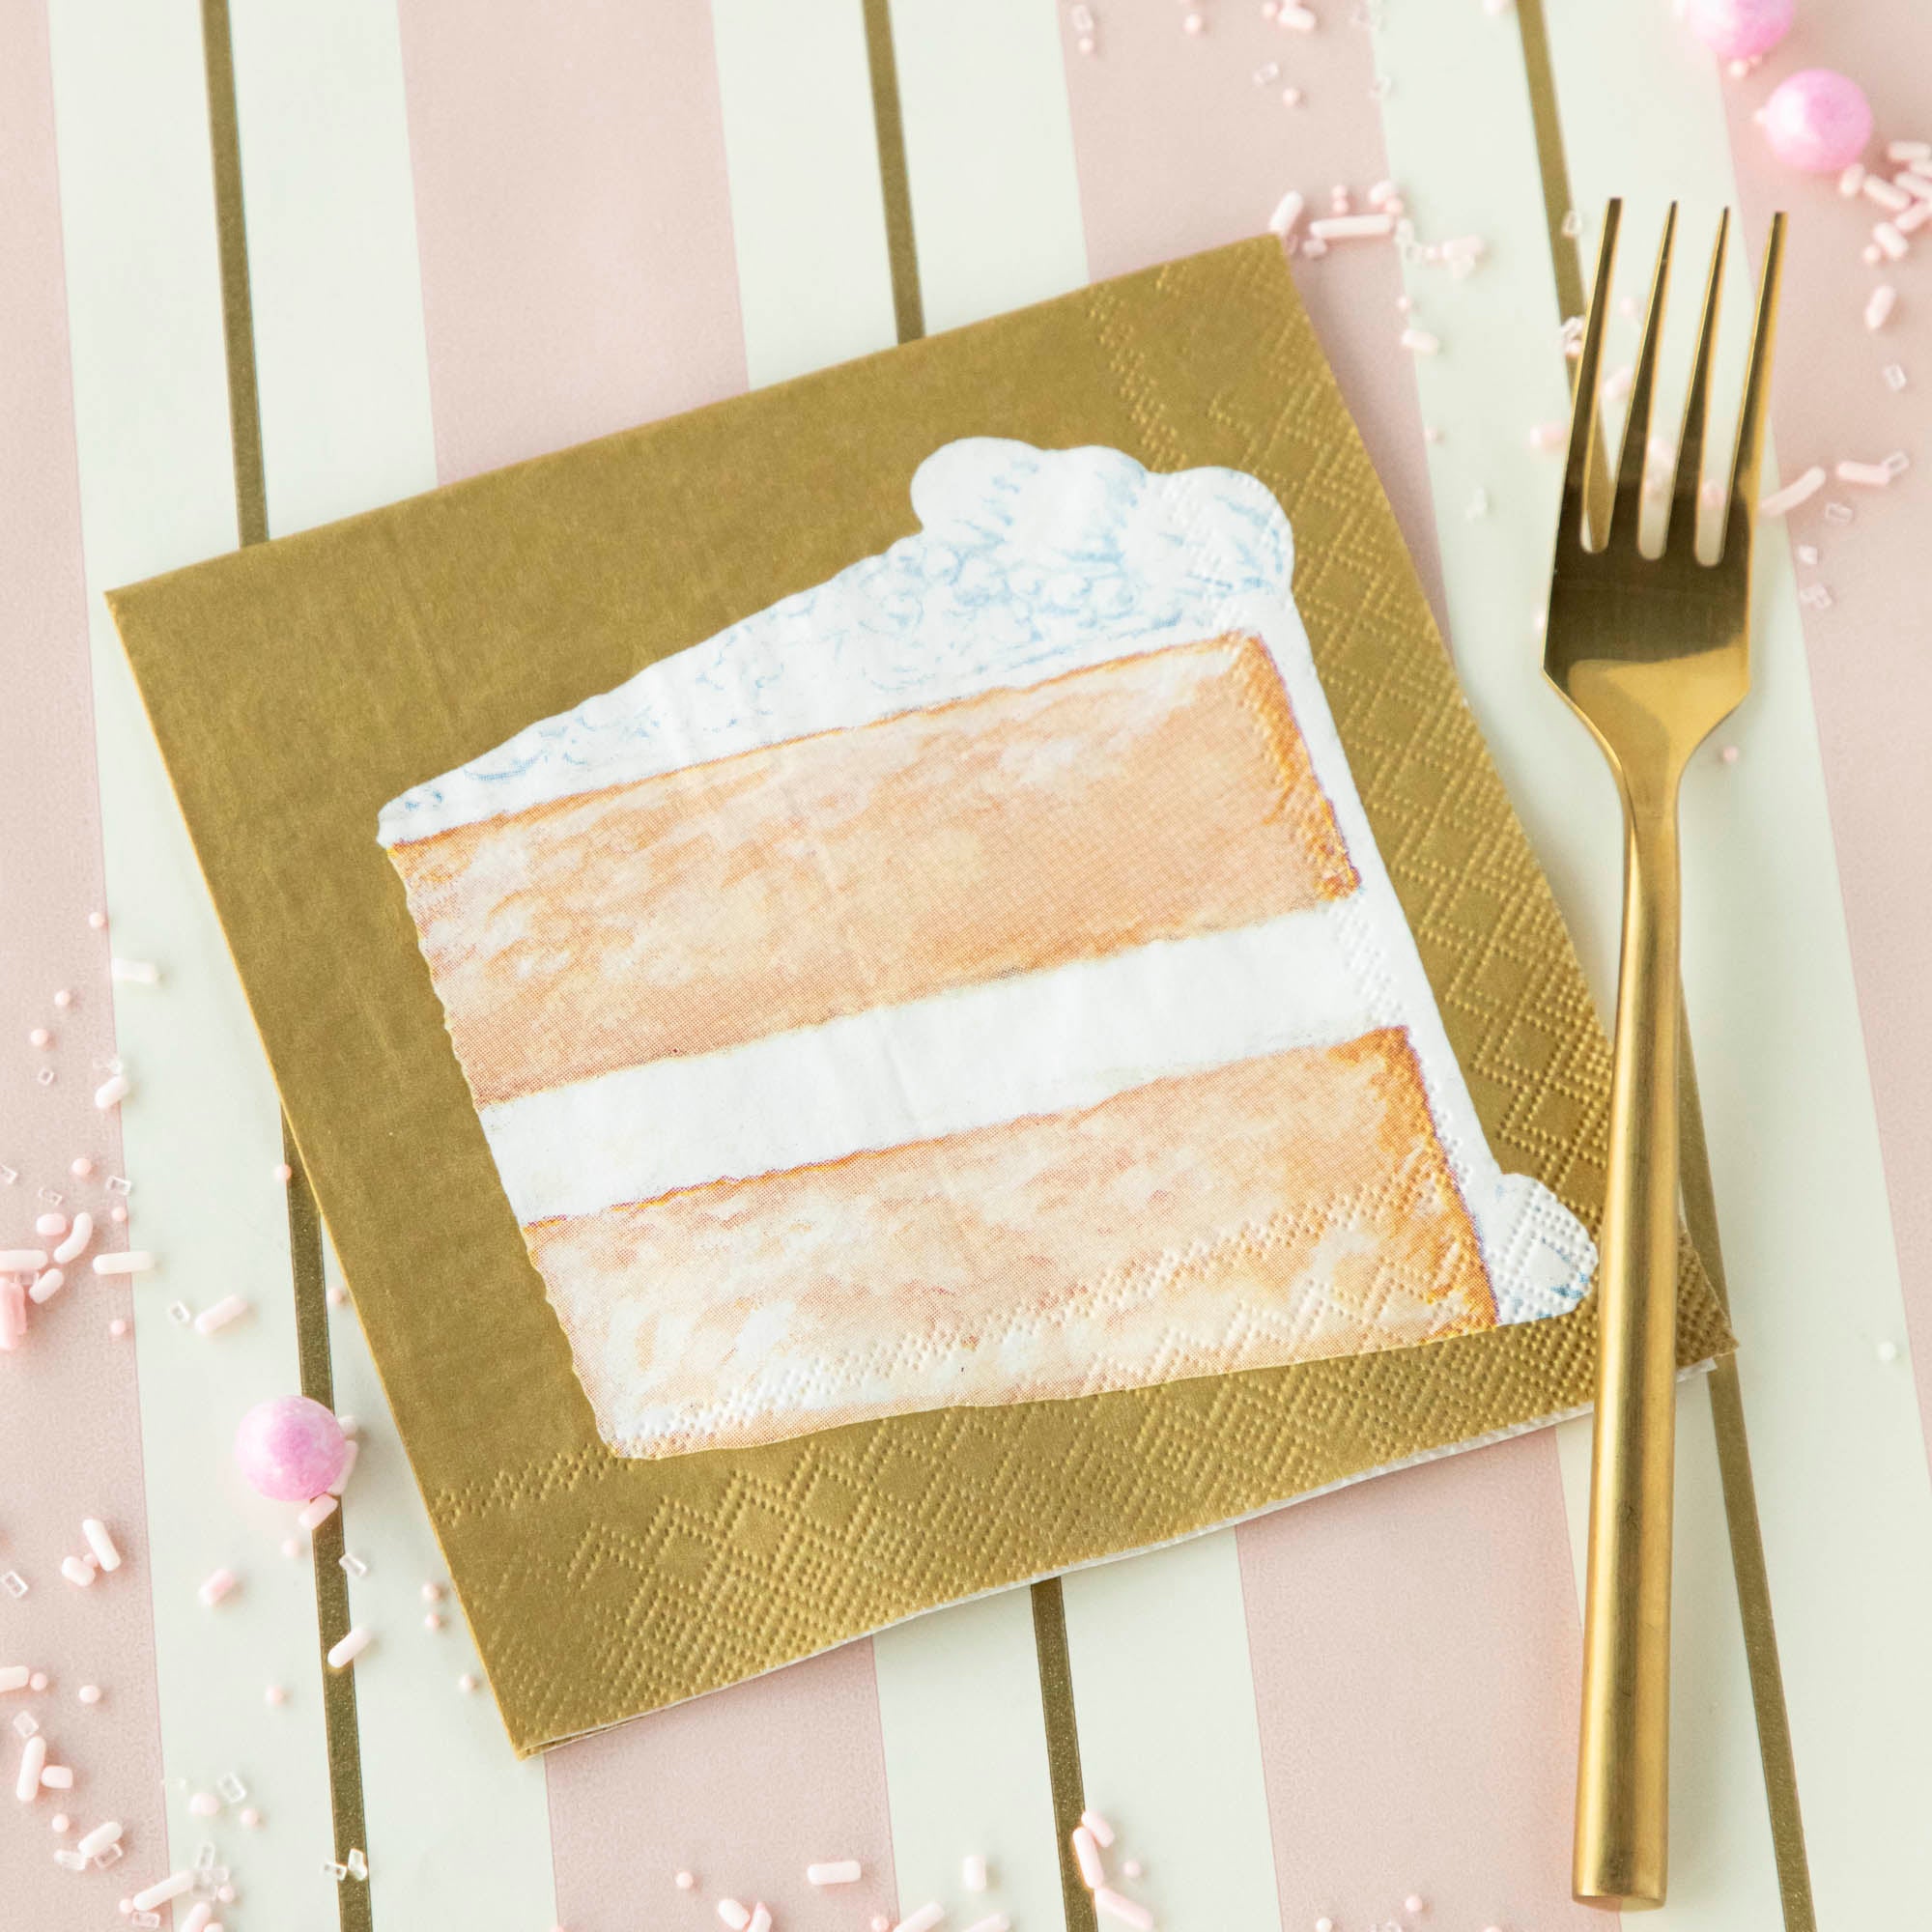 A Sliced Cake Cocktail Napkin on a pink table runner with a gold fork.